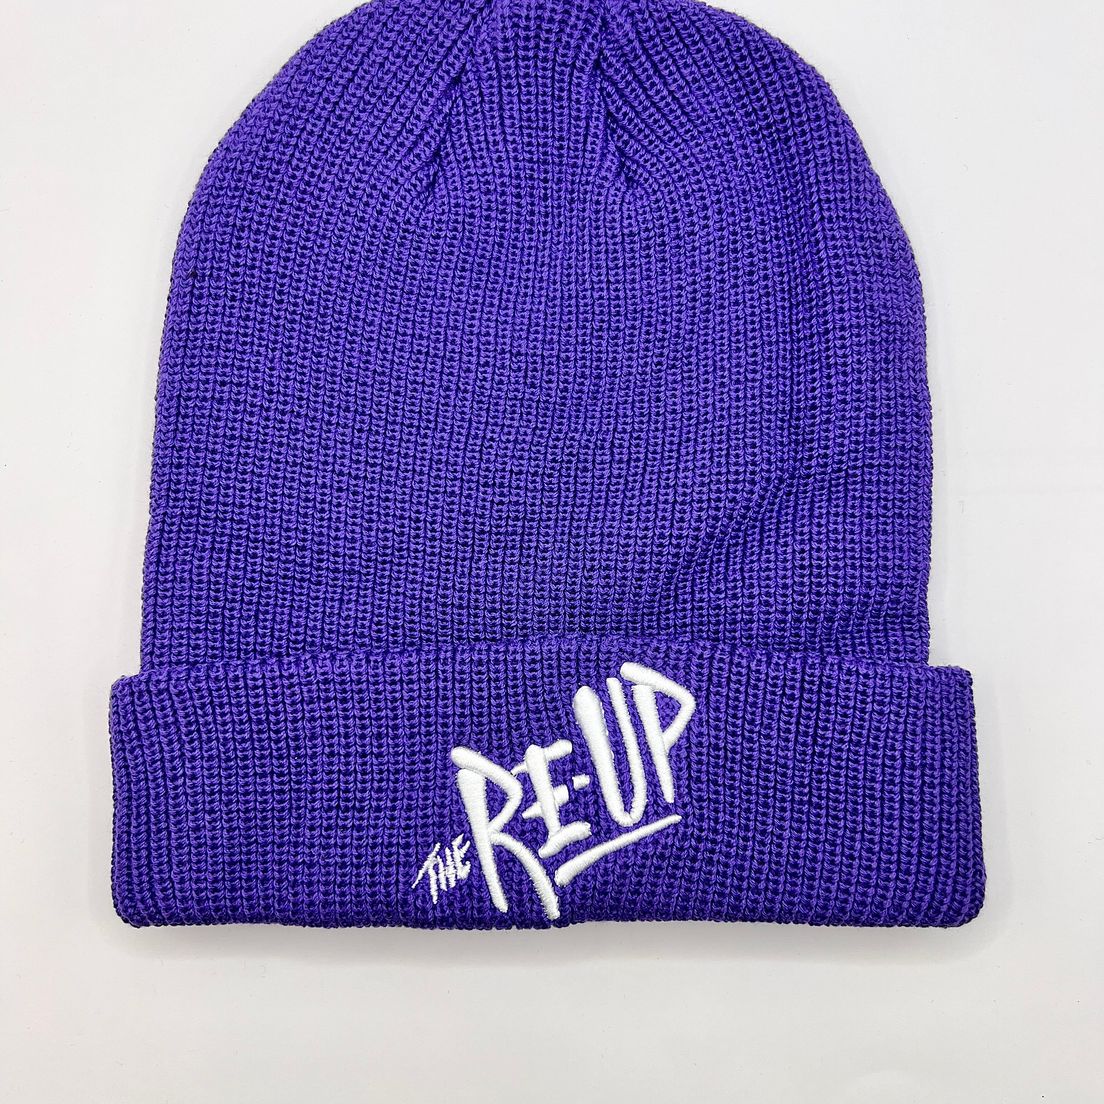 PRE-ORDER ONLY *Deal! $15 Court Purple Edition Beanie - The Re-Up + Preroll